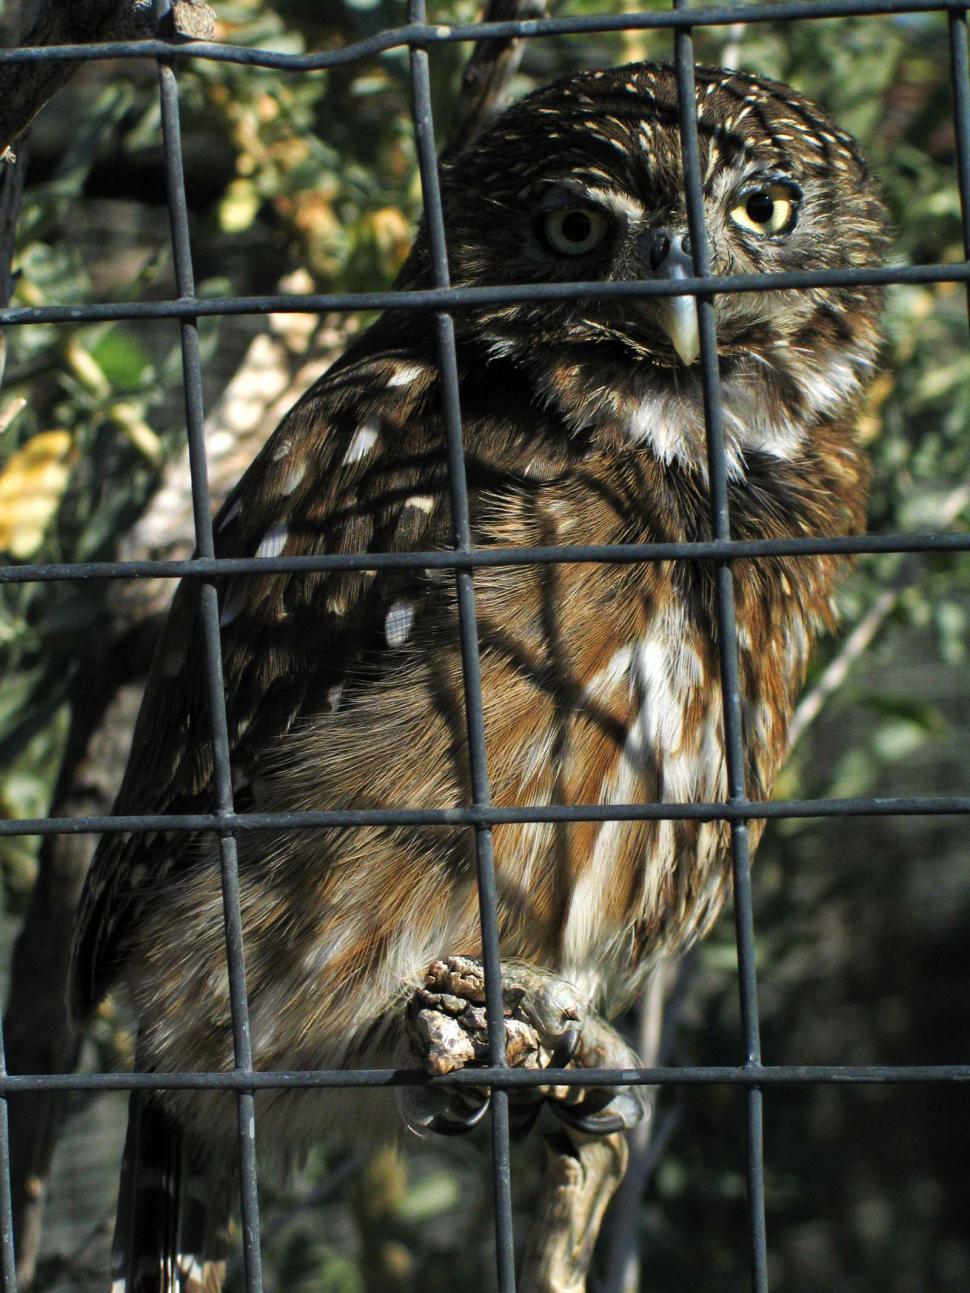 Free Image of Small Owl Perched on Top of Cage 